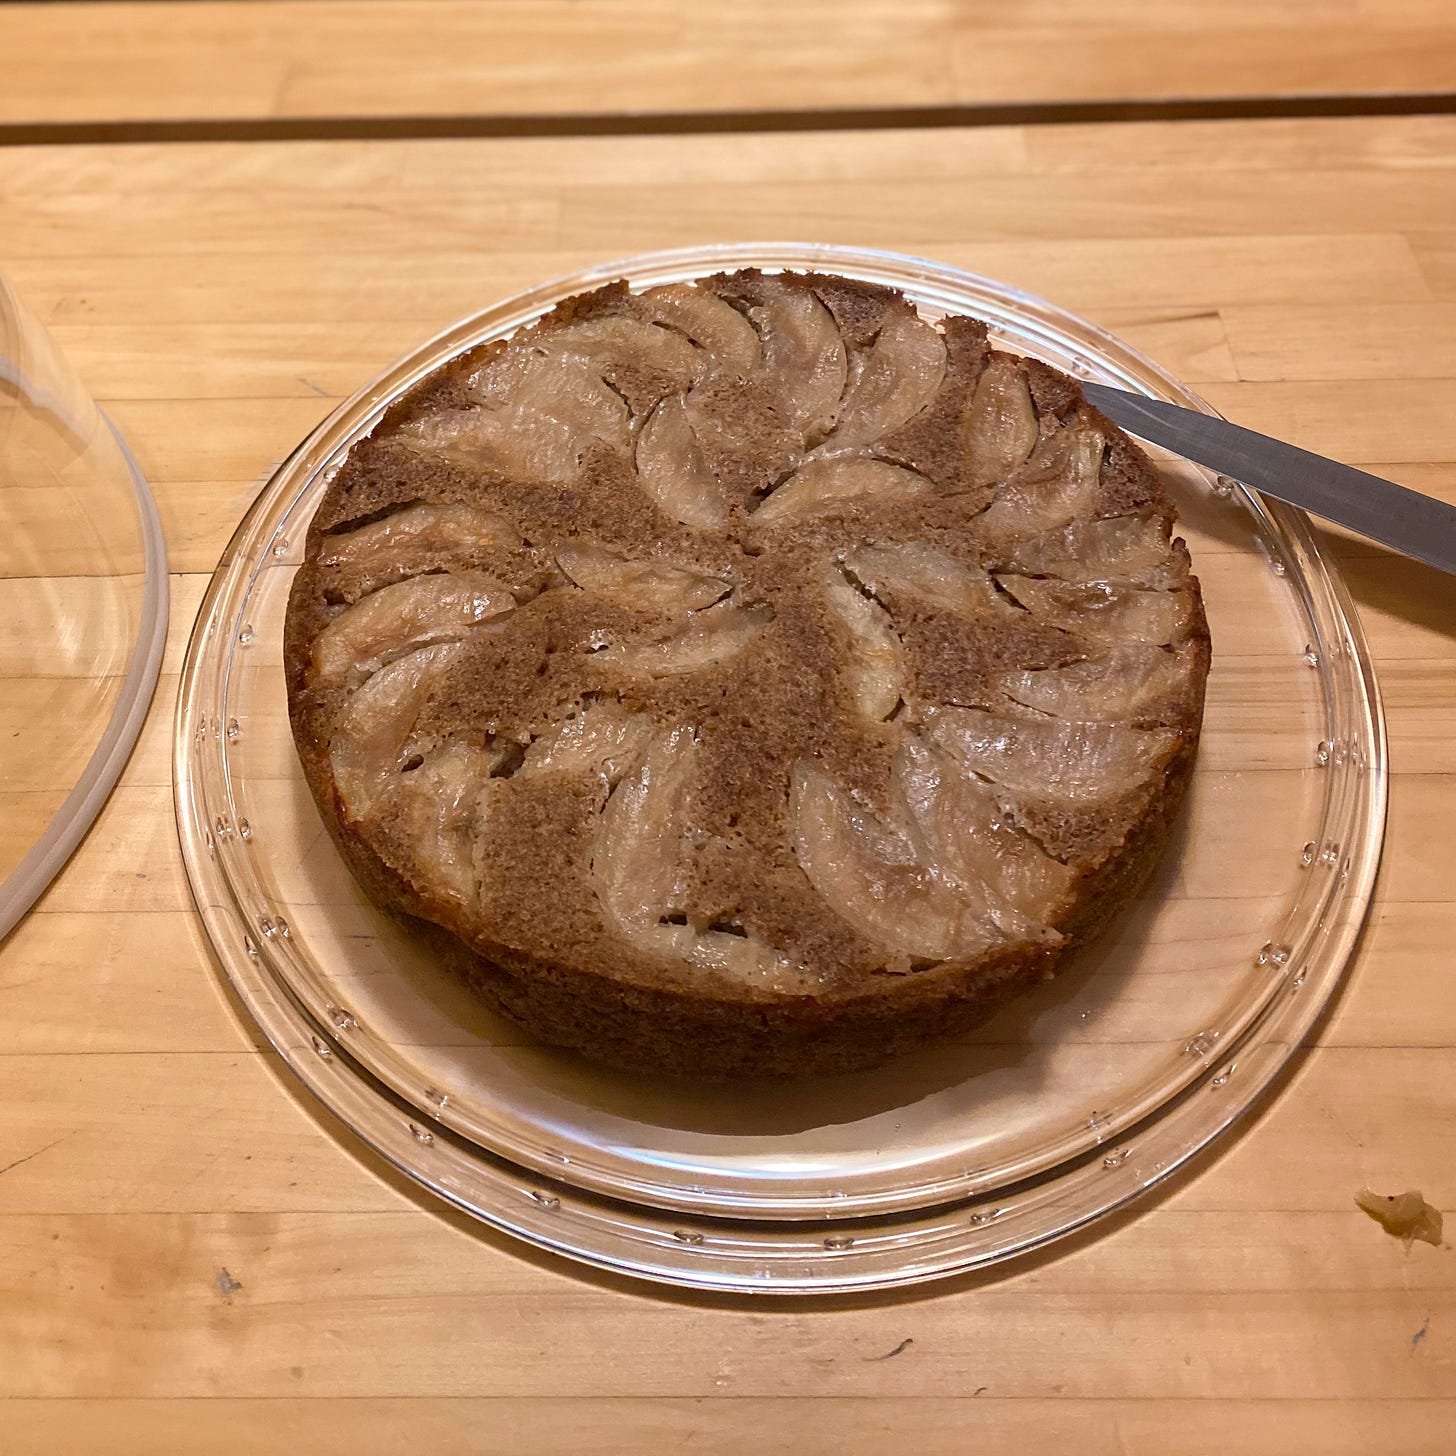 An apple upside down cake on a clear glass cake plate, slices of apple arranged over the top. A knife rests on the side of the plate.